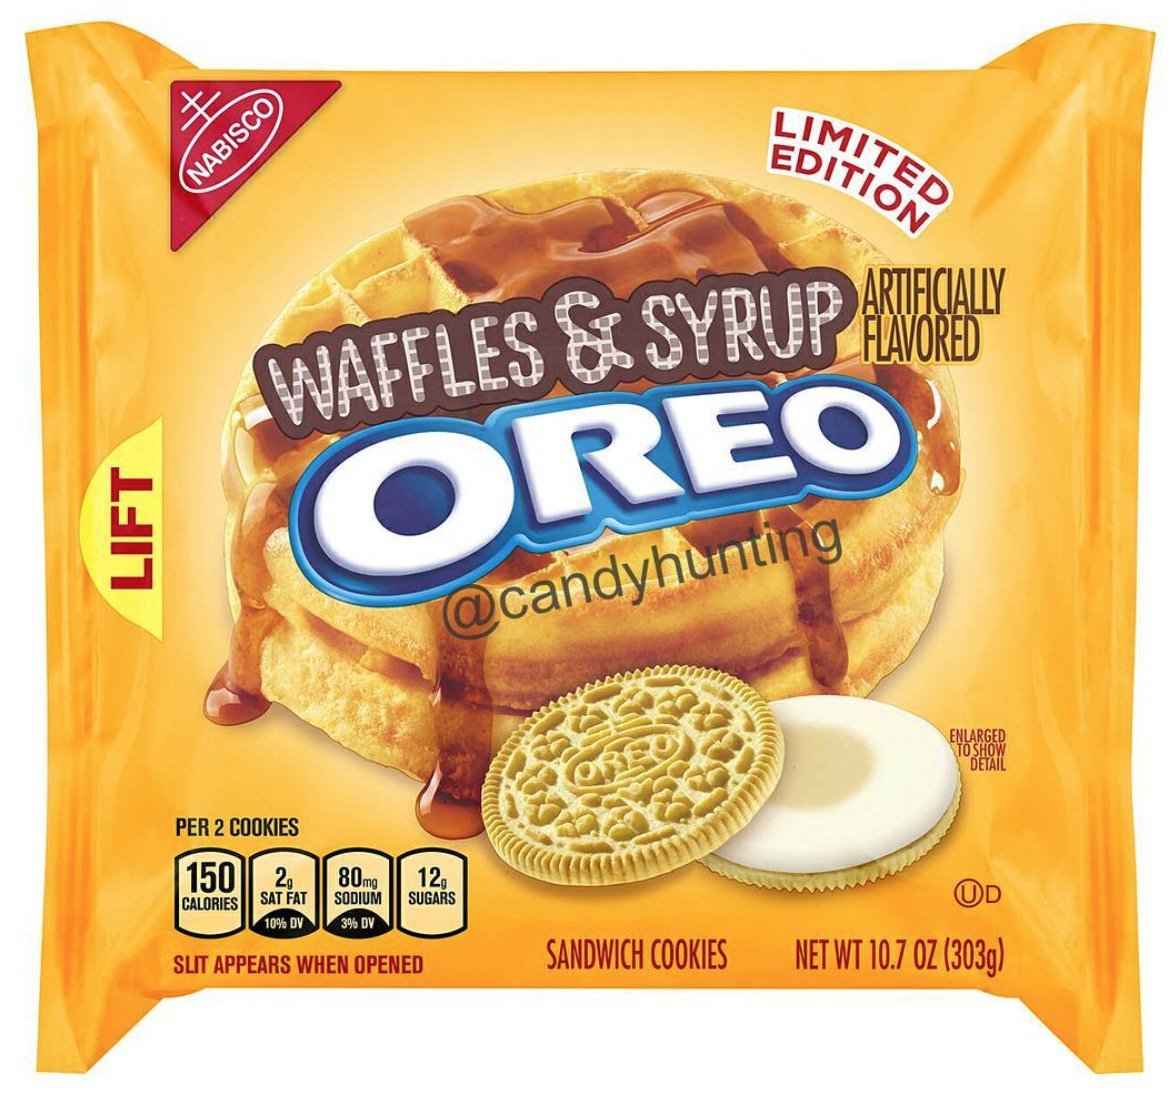 New Flavors Spotted!! Nabisco Oreo Cookie Flavors For 2017